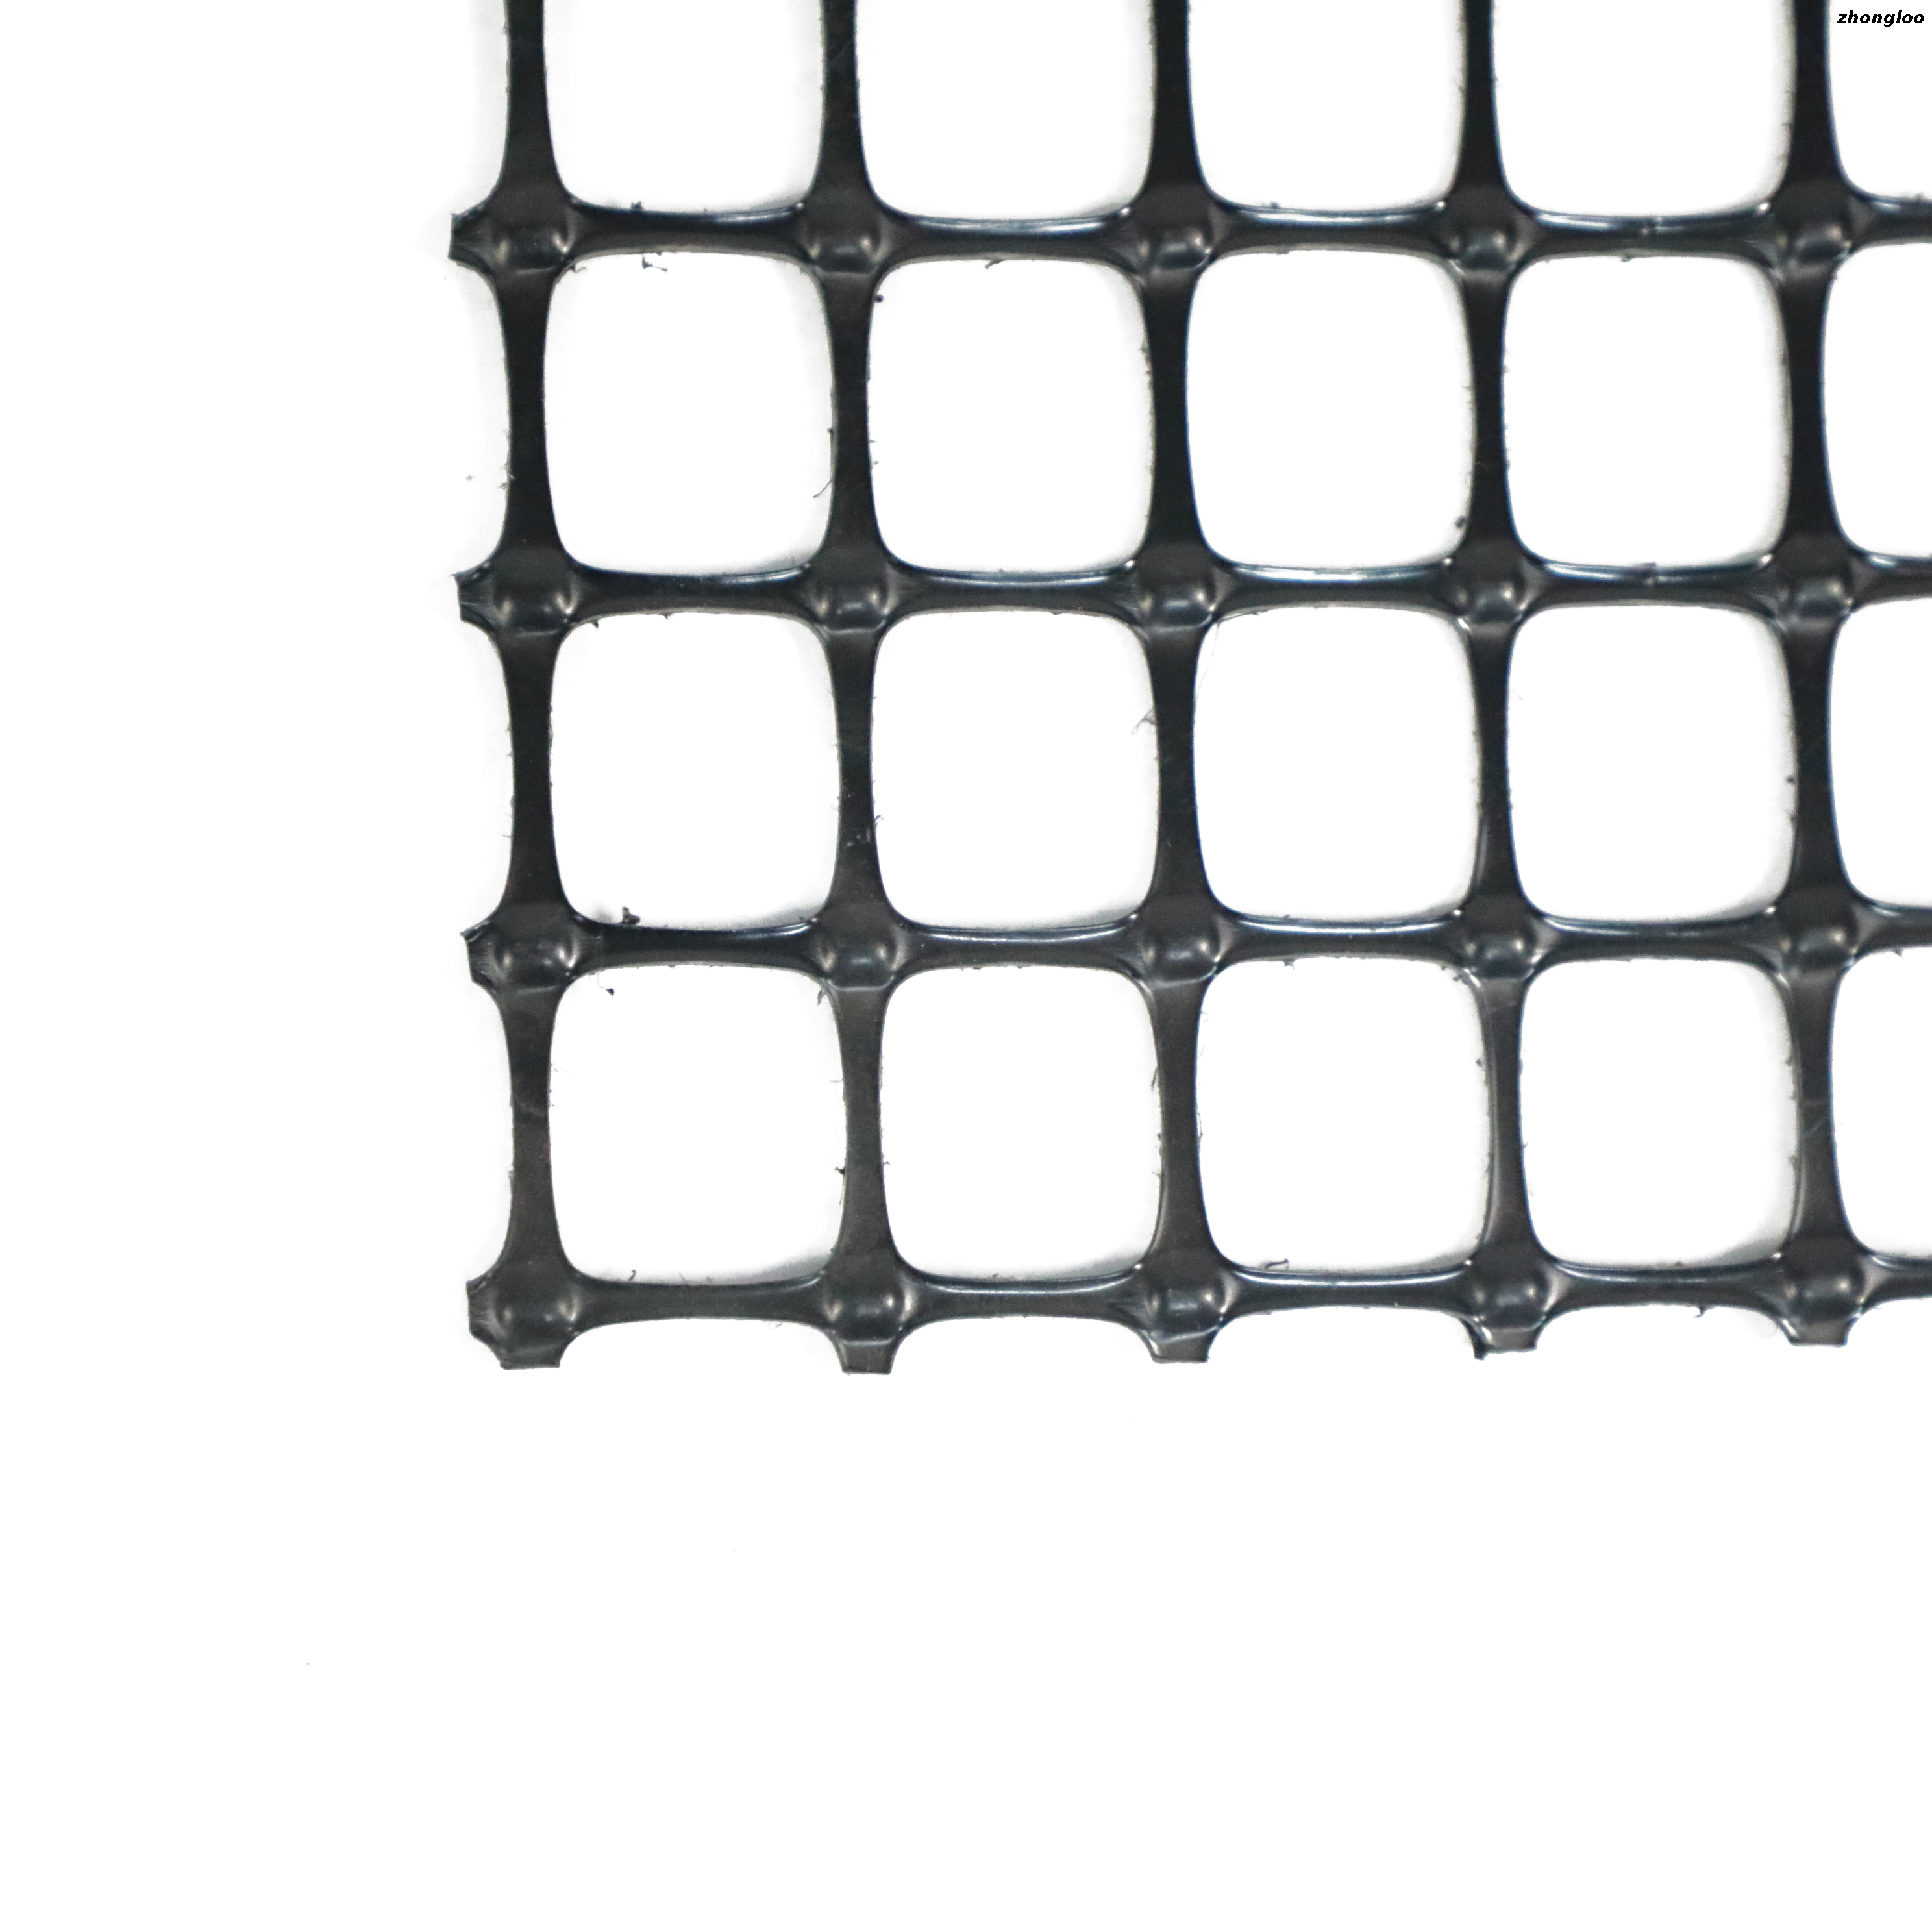 Biaxial Stretch Geogrid Fence Reinforcement Plastic Grid Biaxial Geogrid